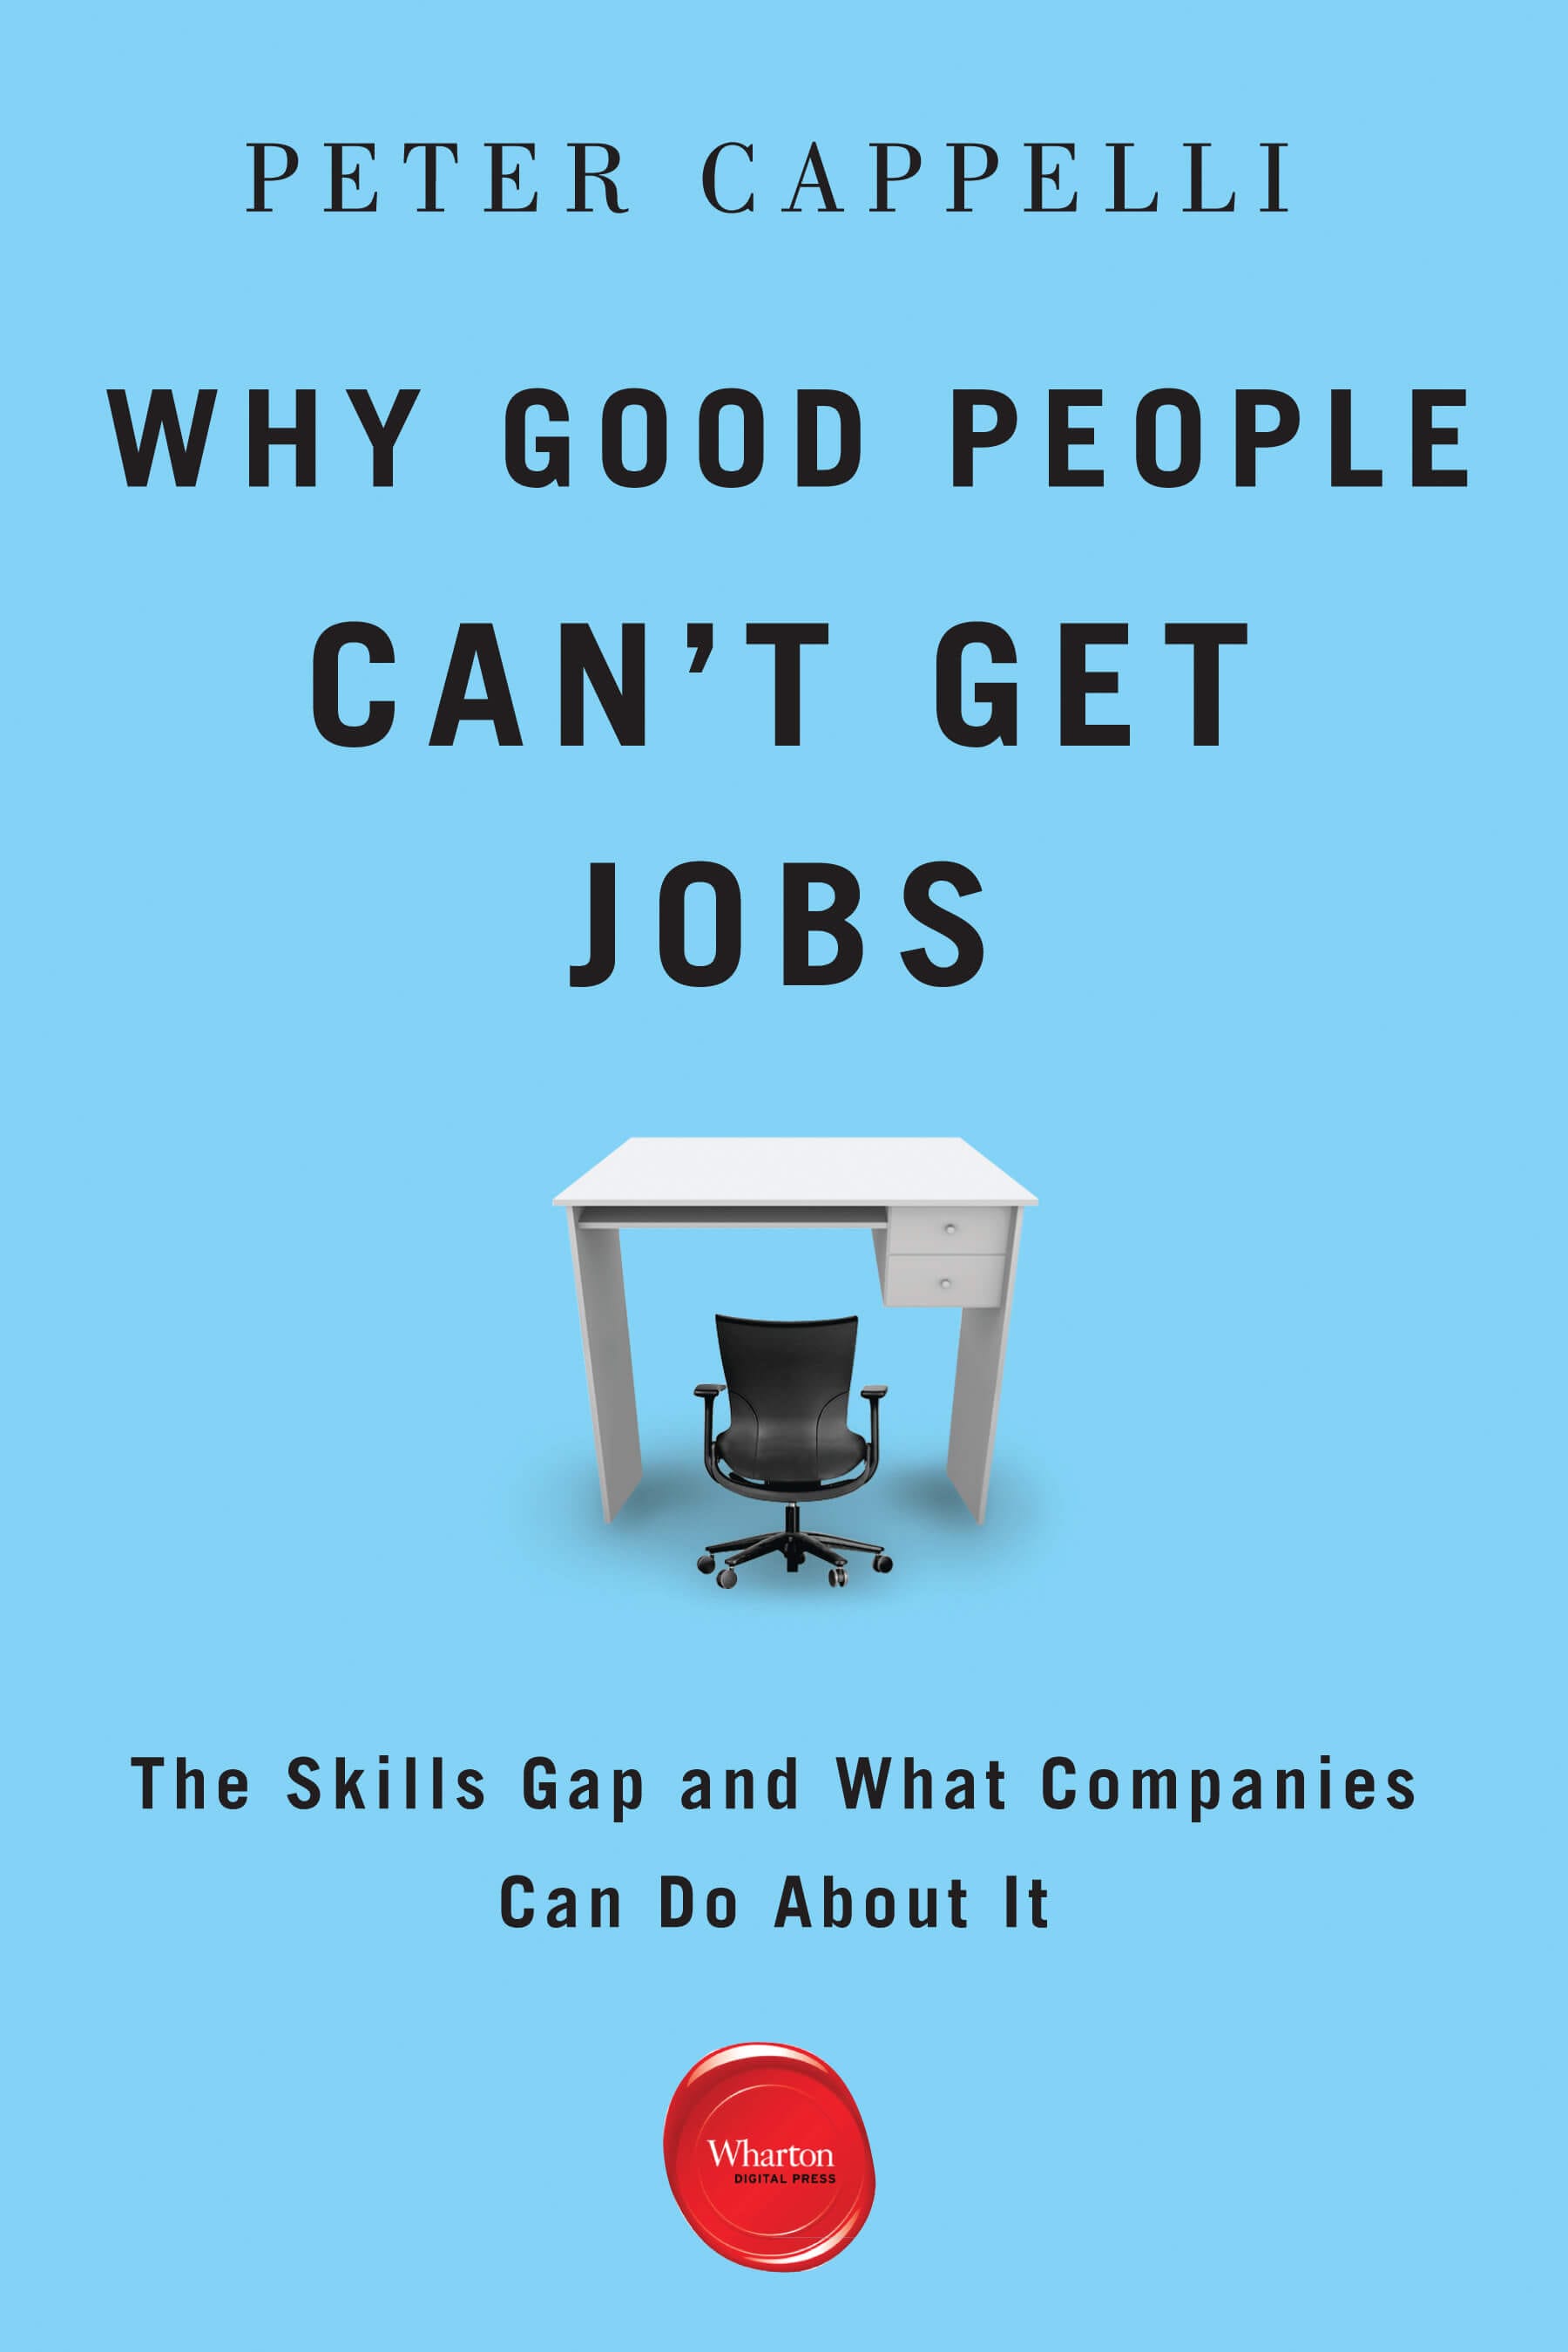 Cappelli: Why Good People Can’t Get Jobs